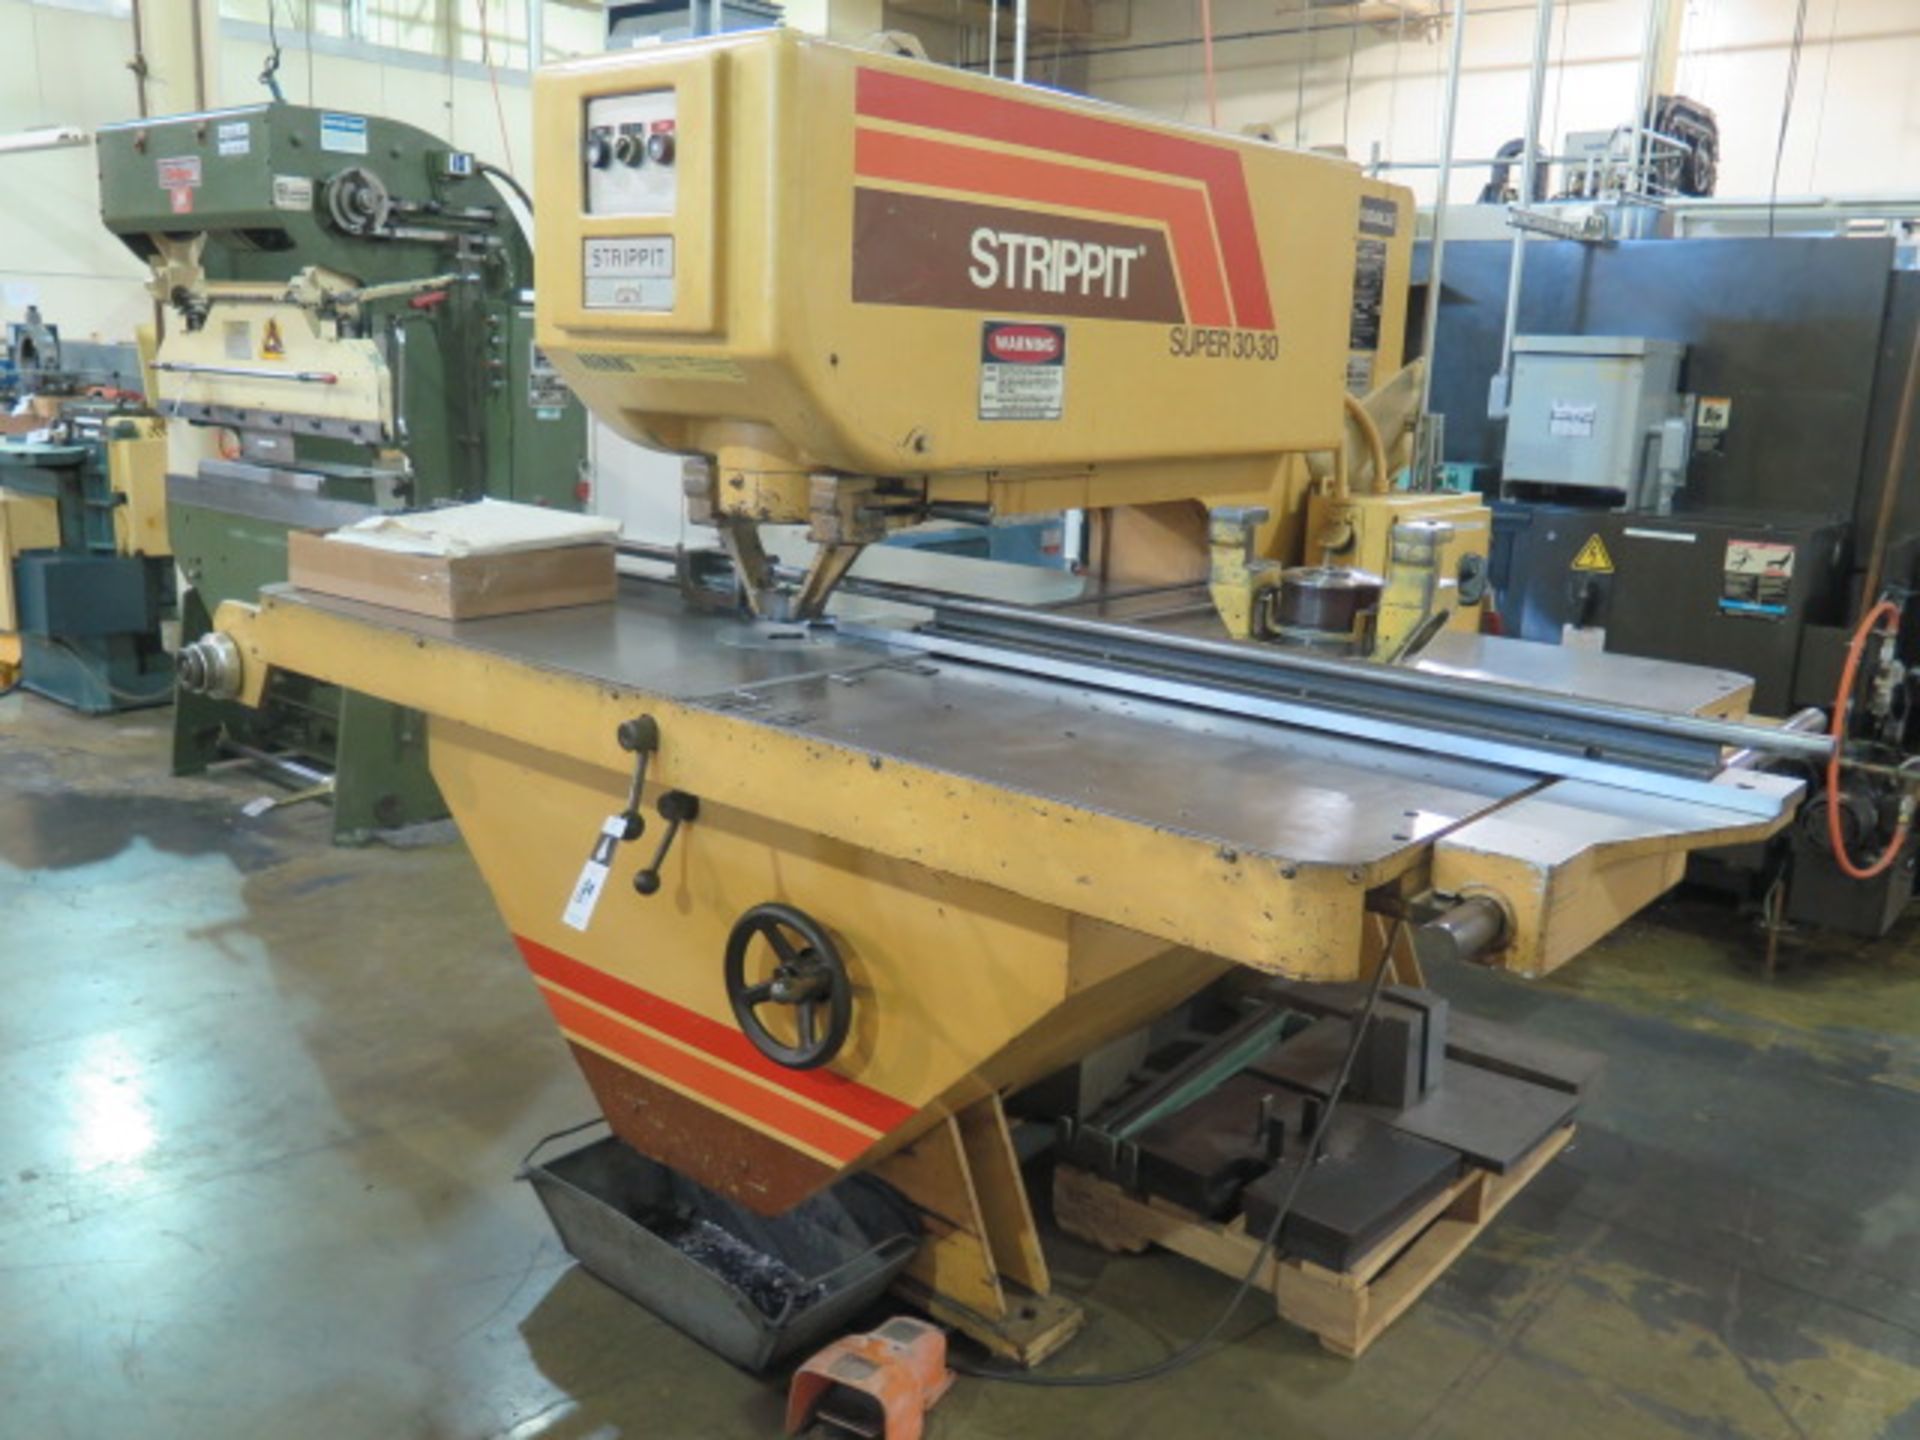 Strippit Super 30/30 30 Ton Fabricator Punch Press s/n 174982879 w/ Tooling (SOLD AS-IS - NO